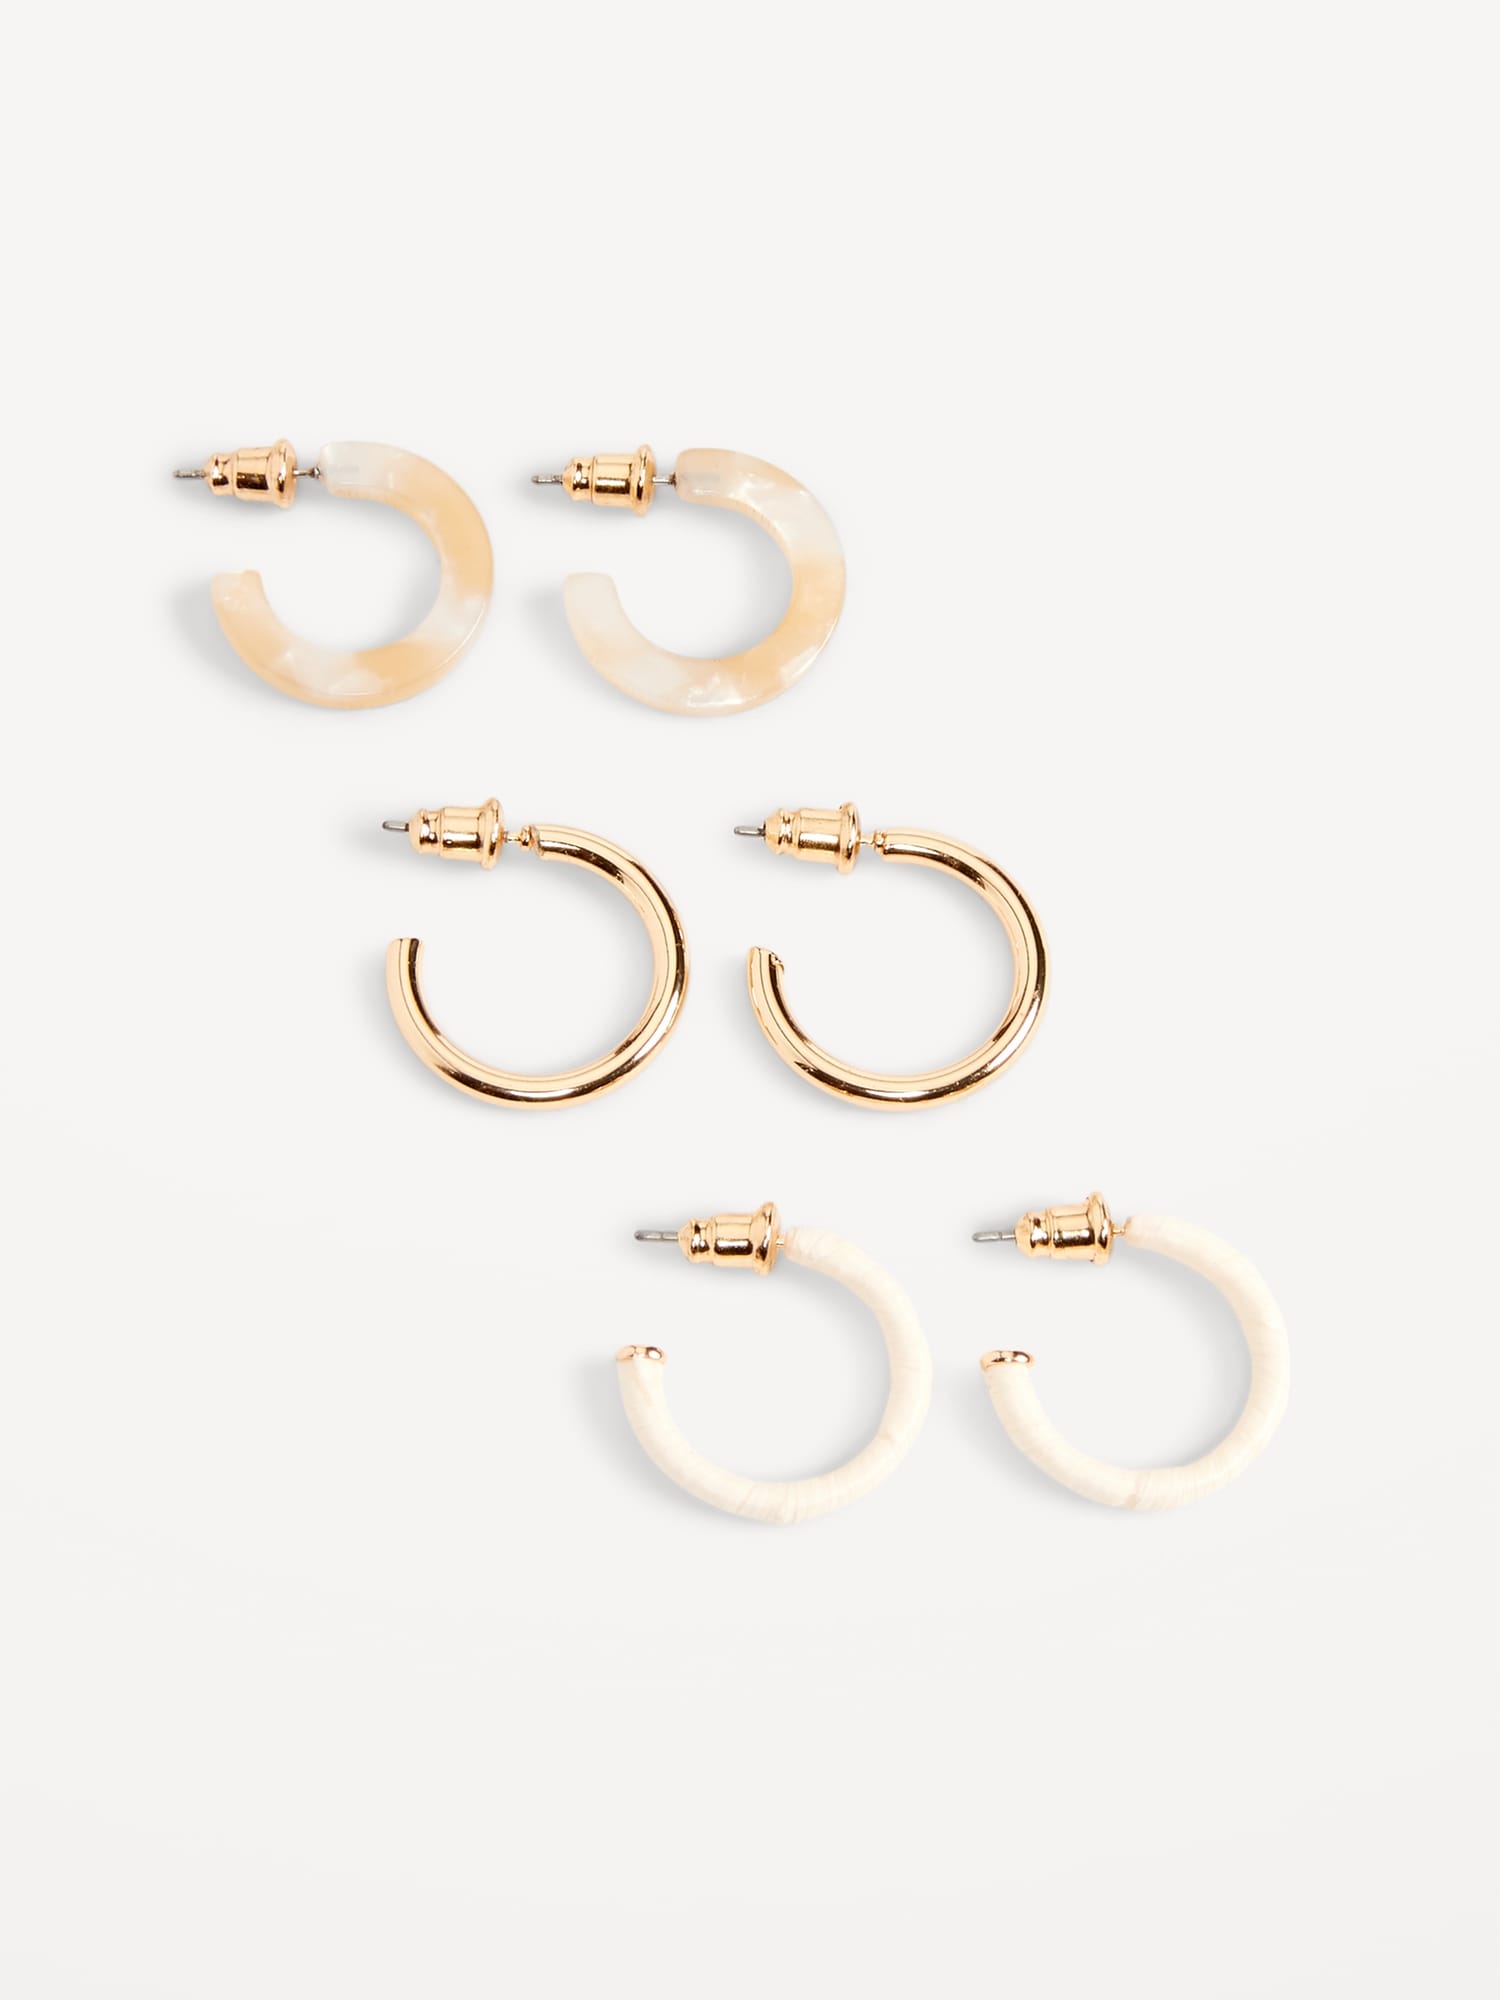 Old Navy Gold-Plated Open Hoop Earrings Variety 3-Pack for Women gold. 1